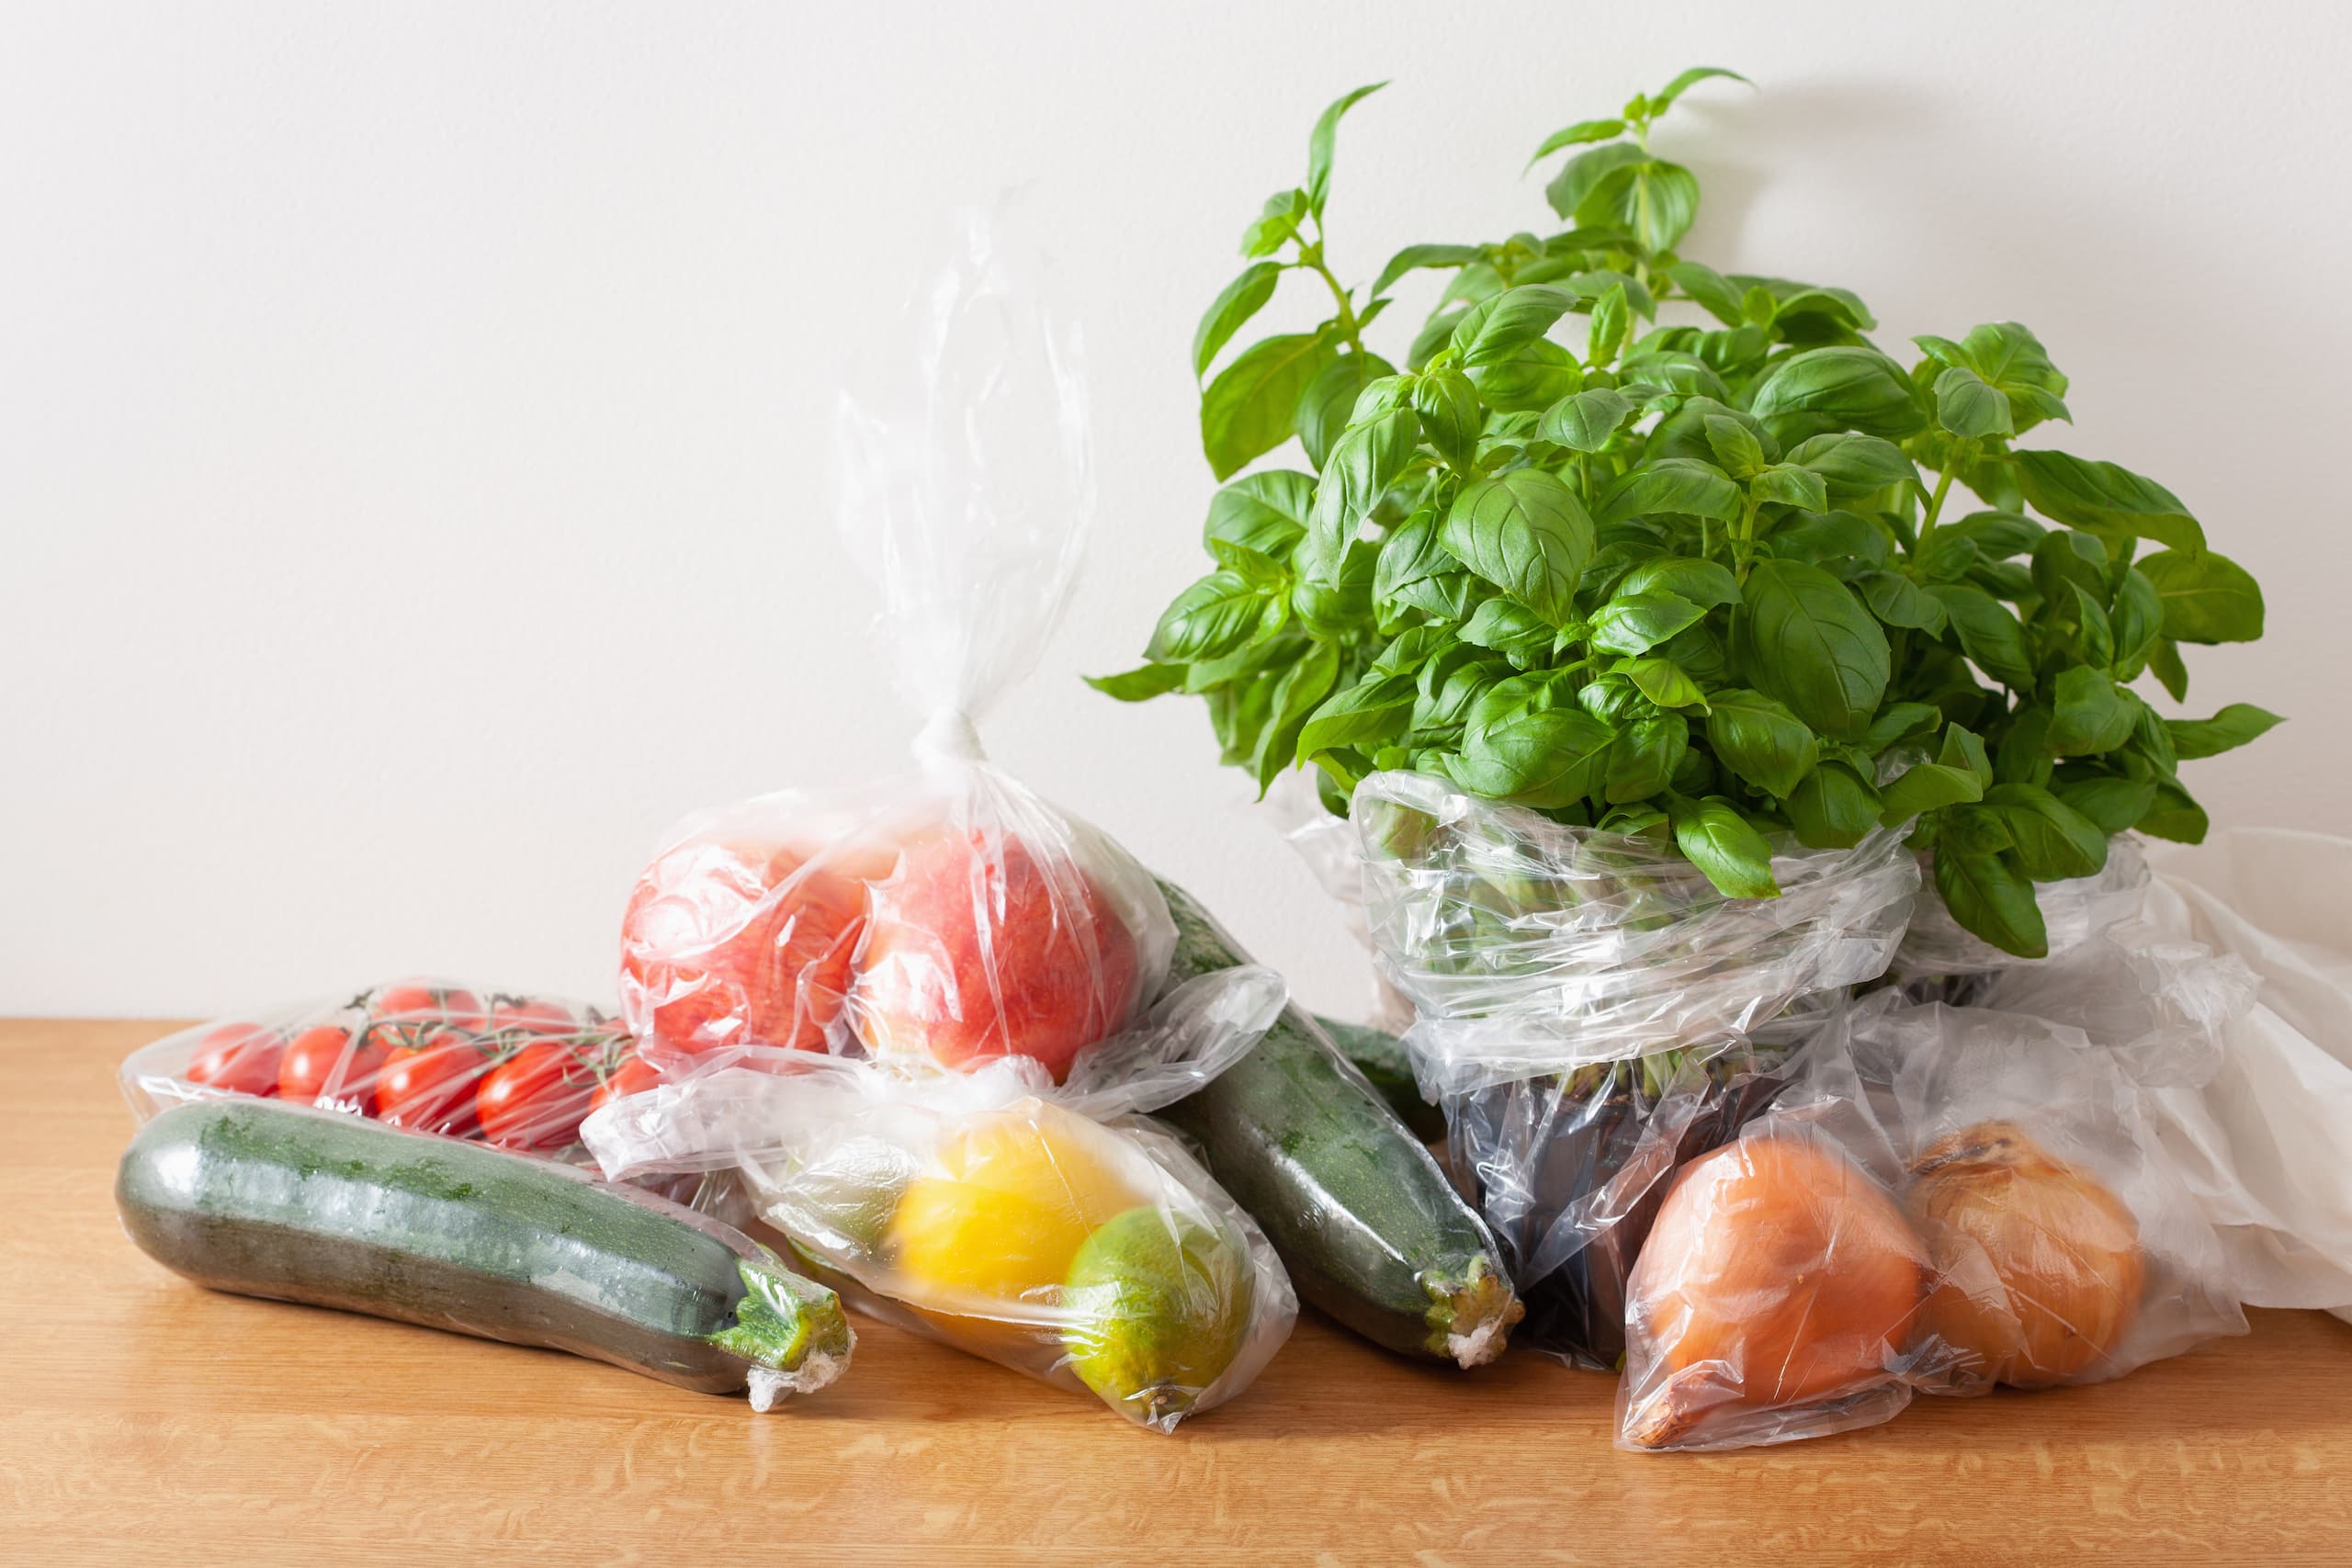 Plastic bags for fruits and vegetables